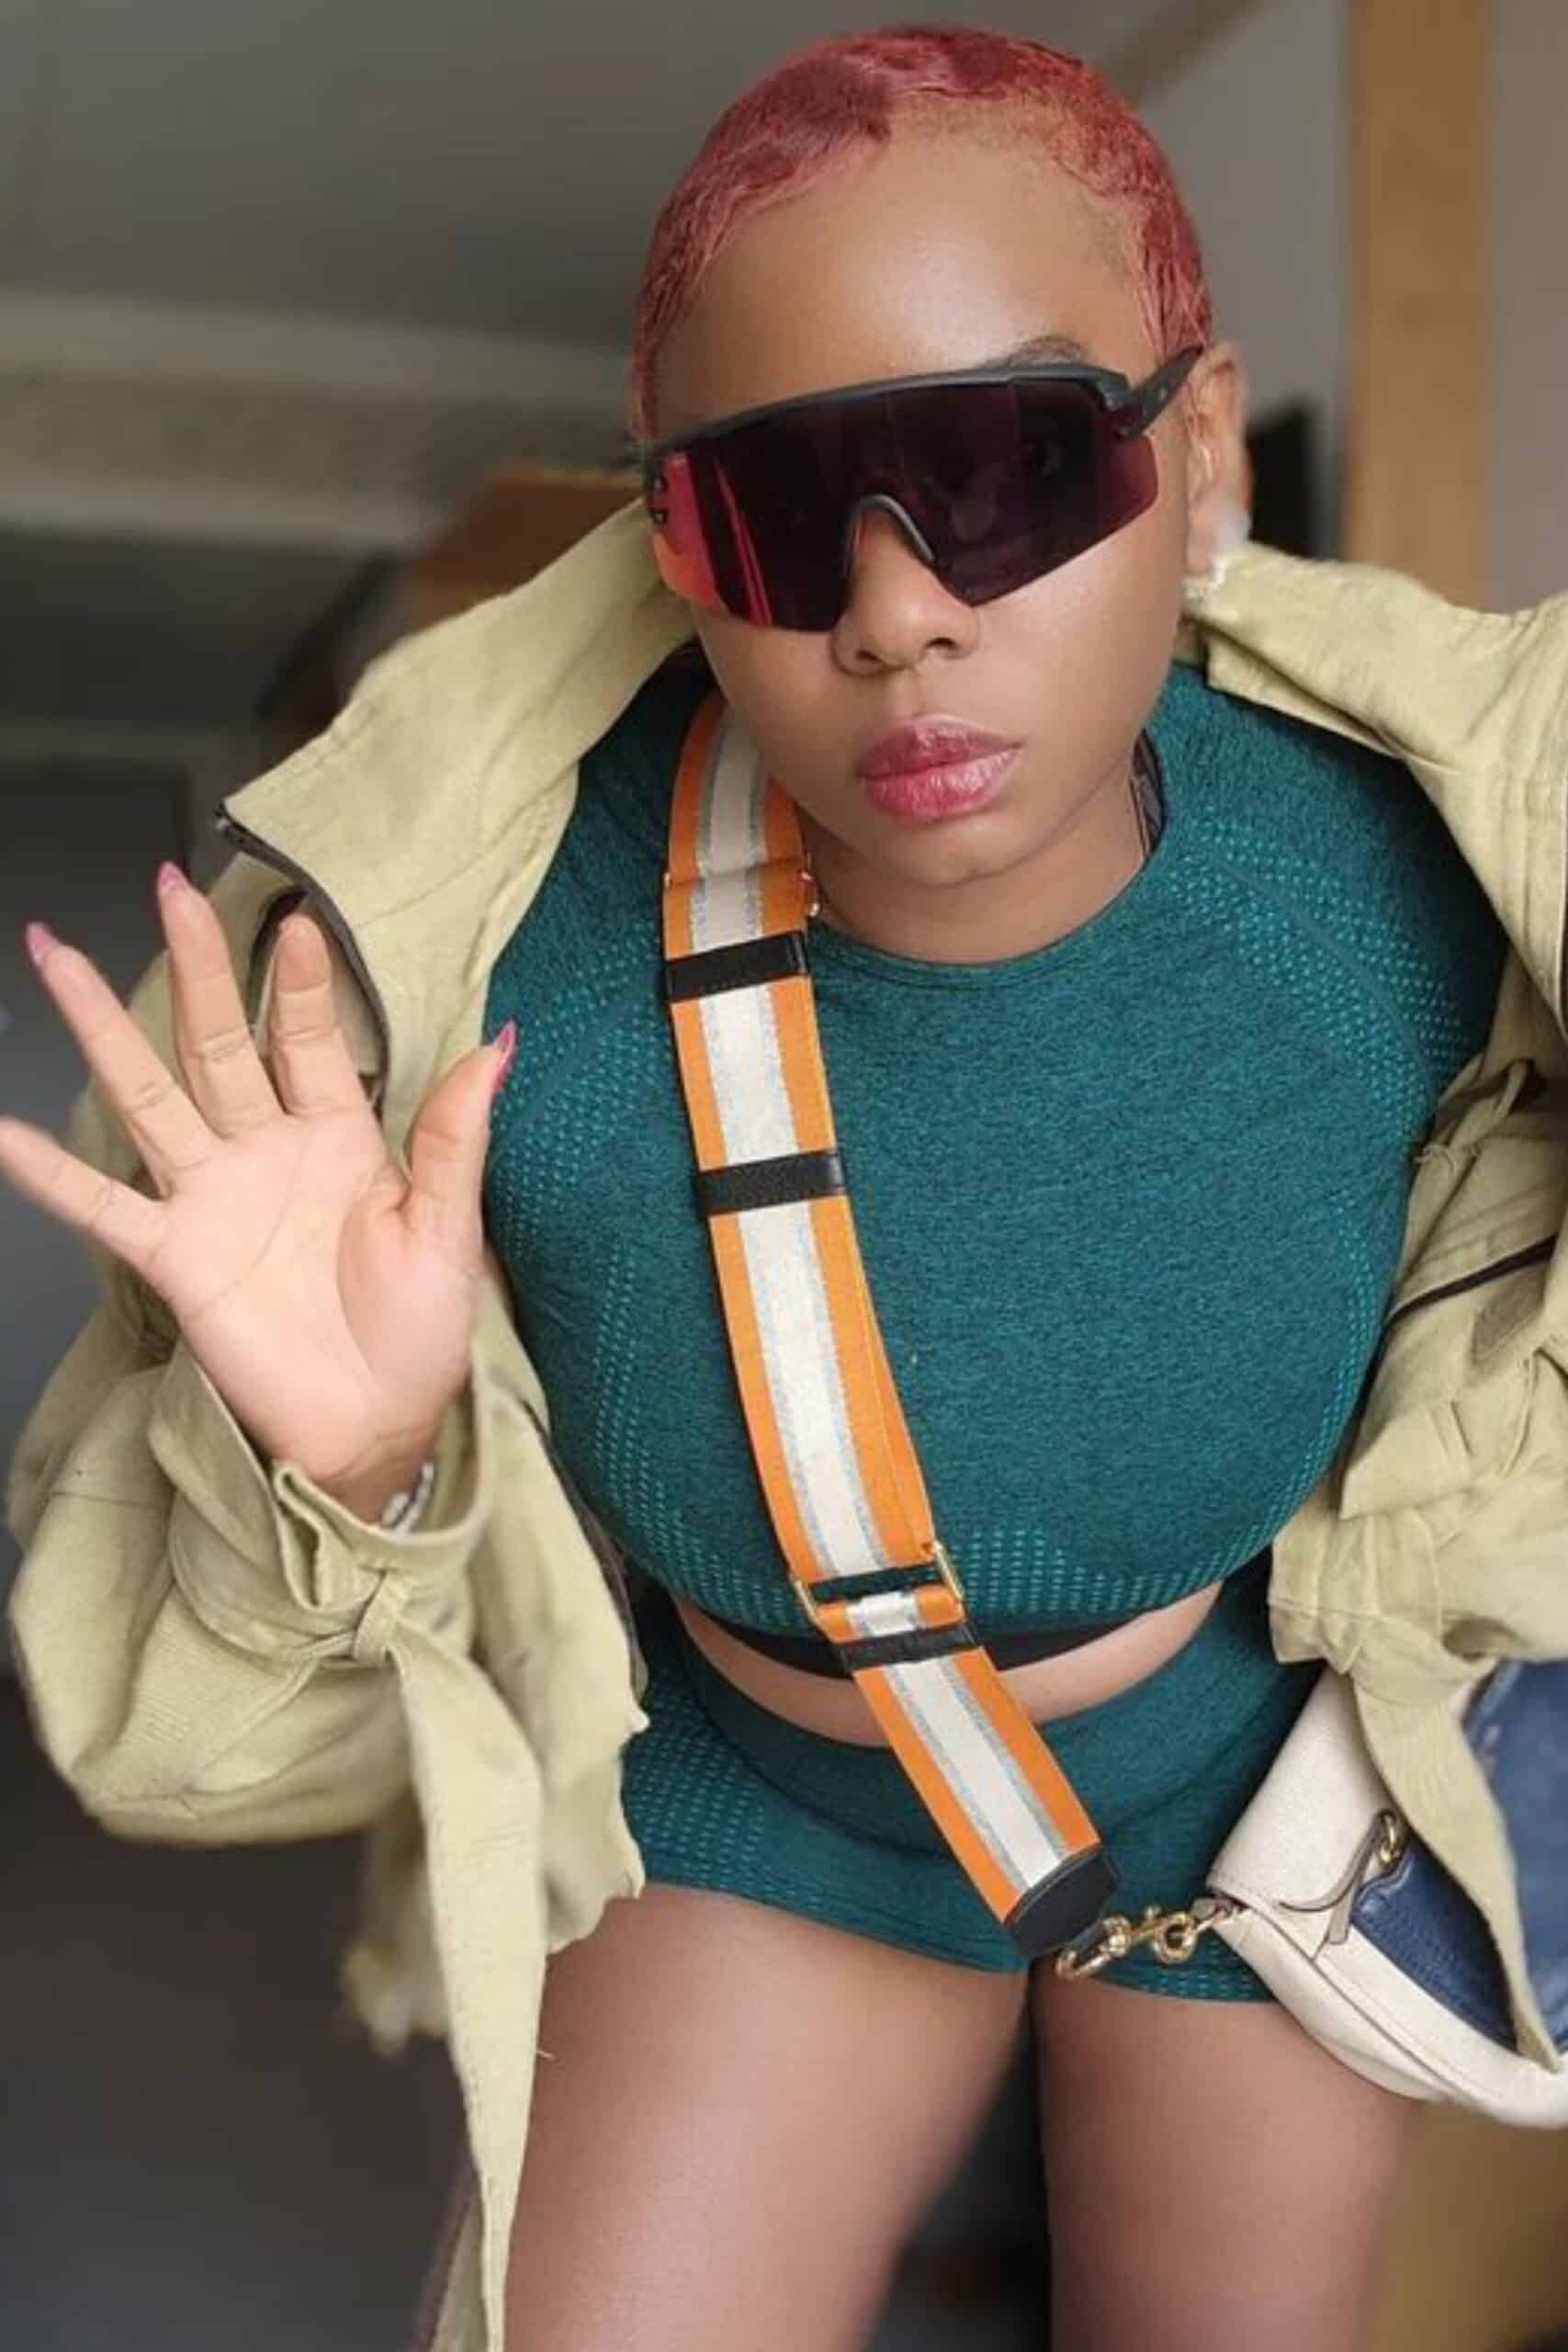 Yemi Alade unveils incredible physique after daily workout routine